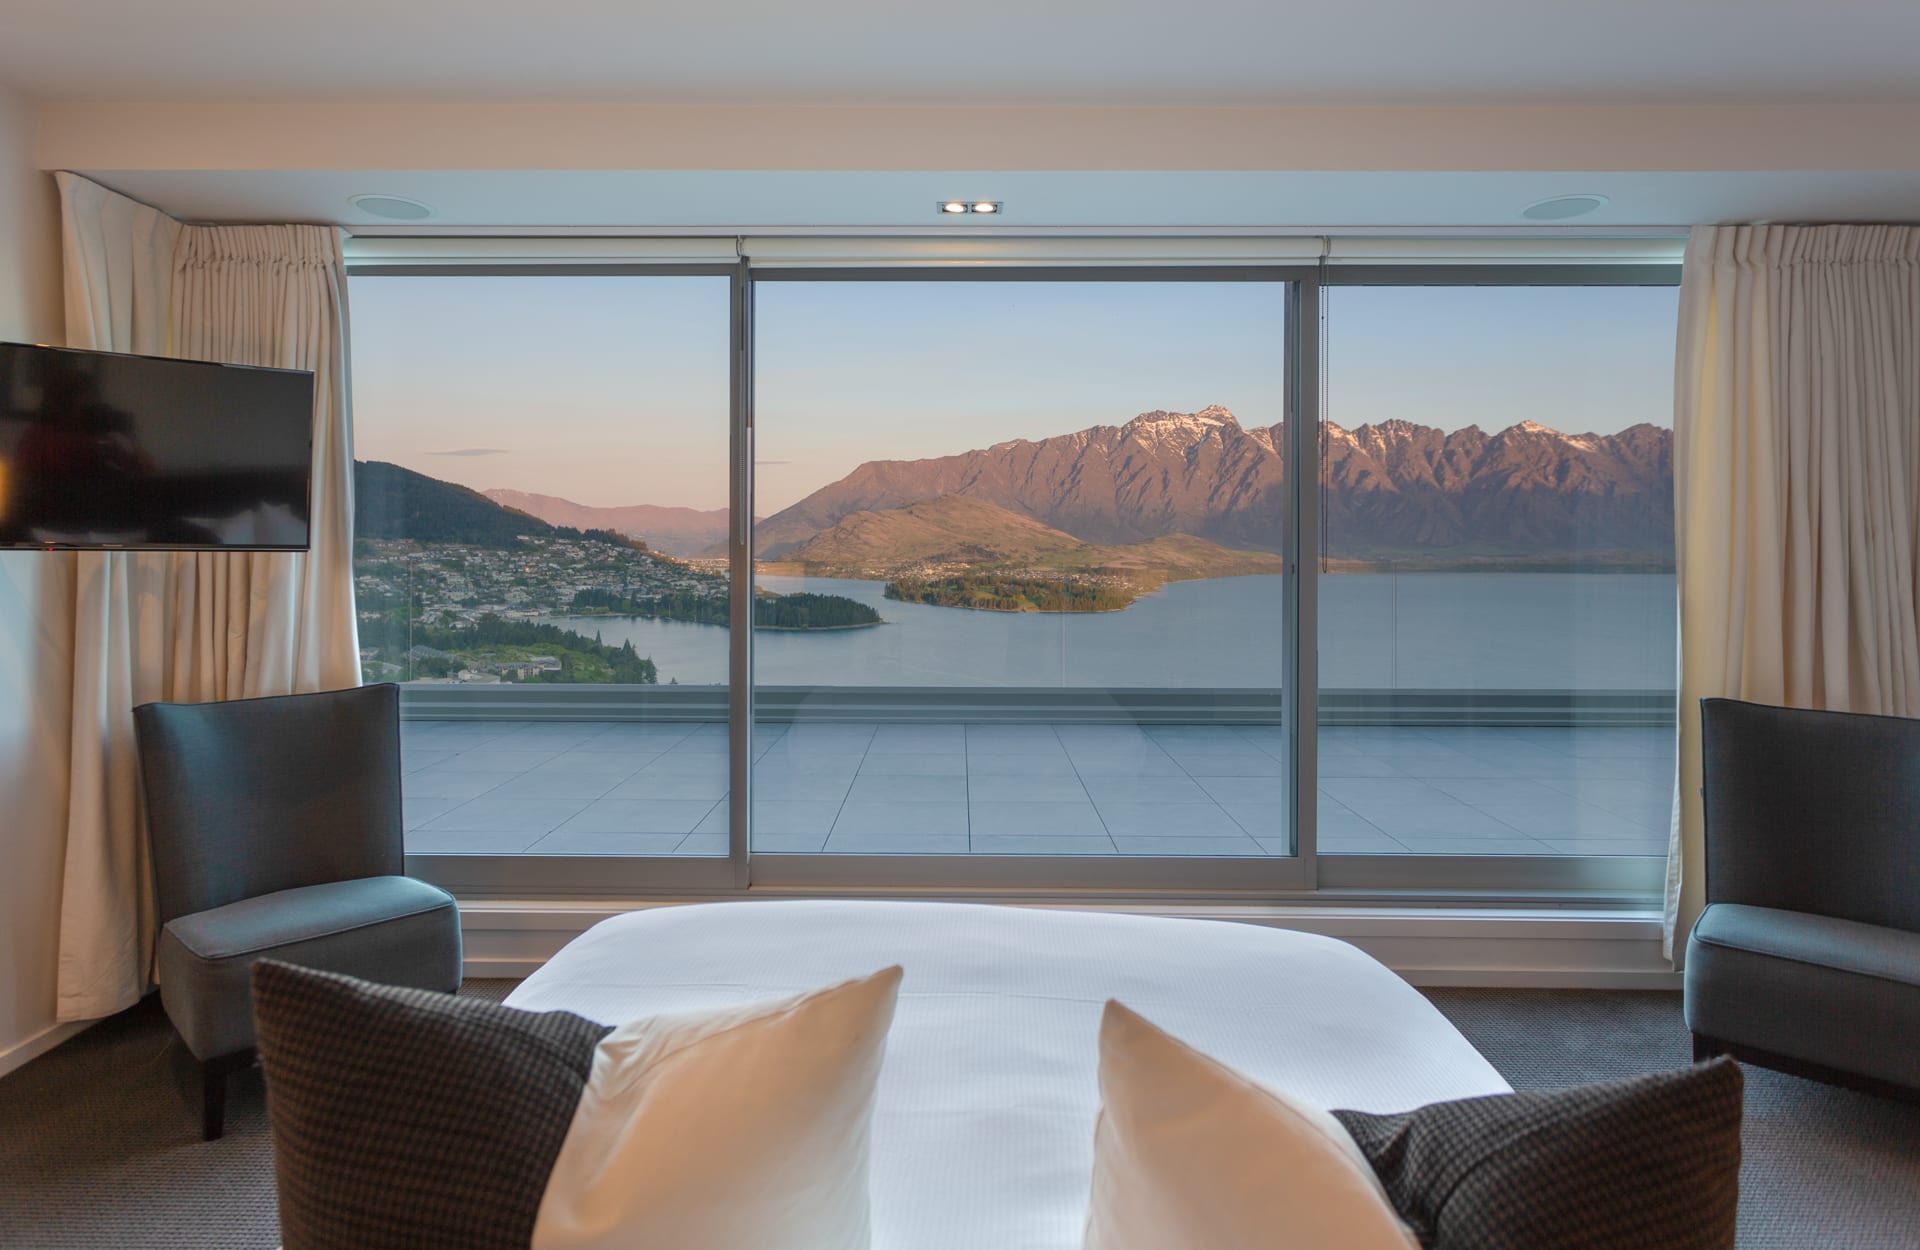 Relax and admire the mountains from your bed